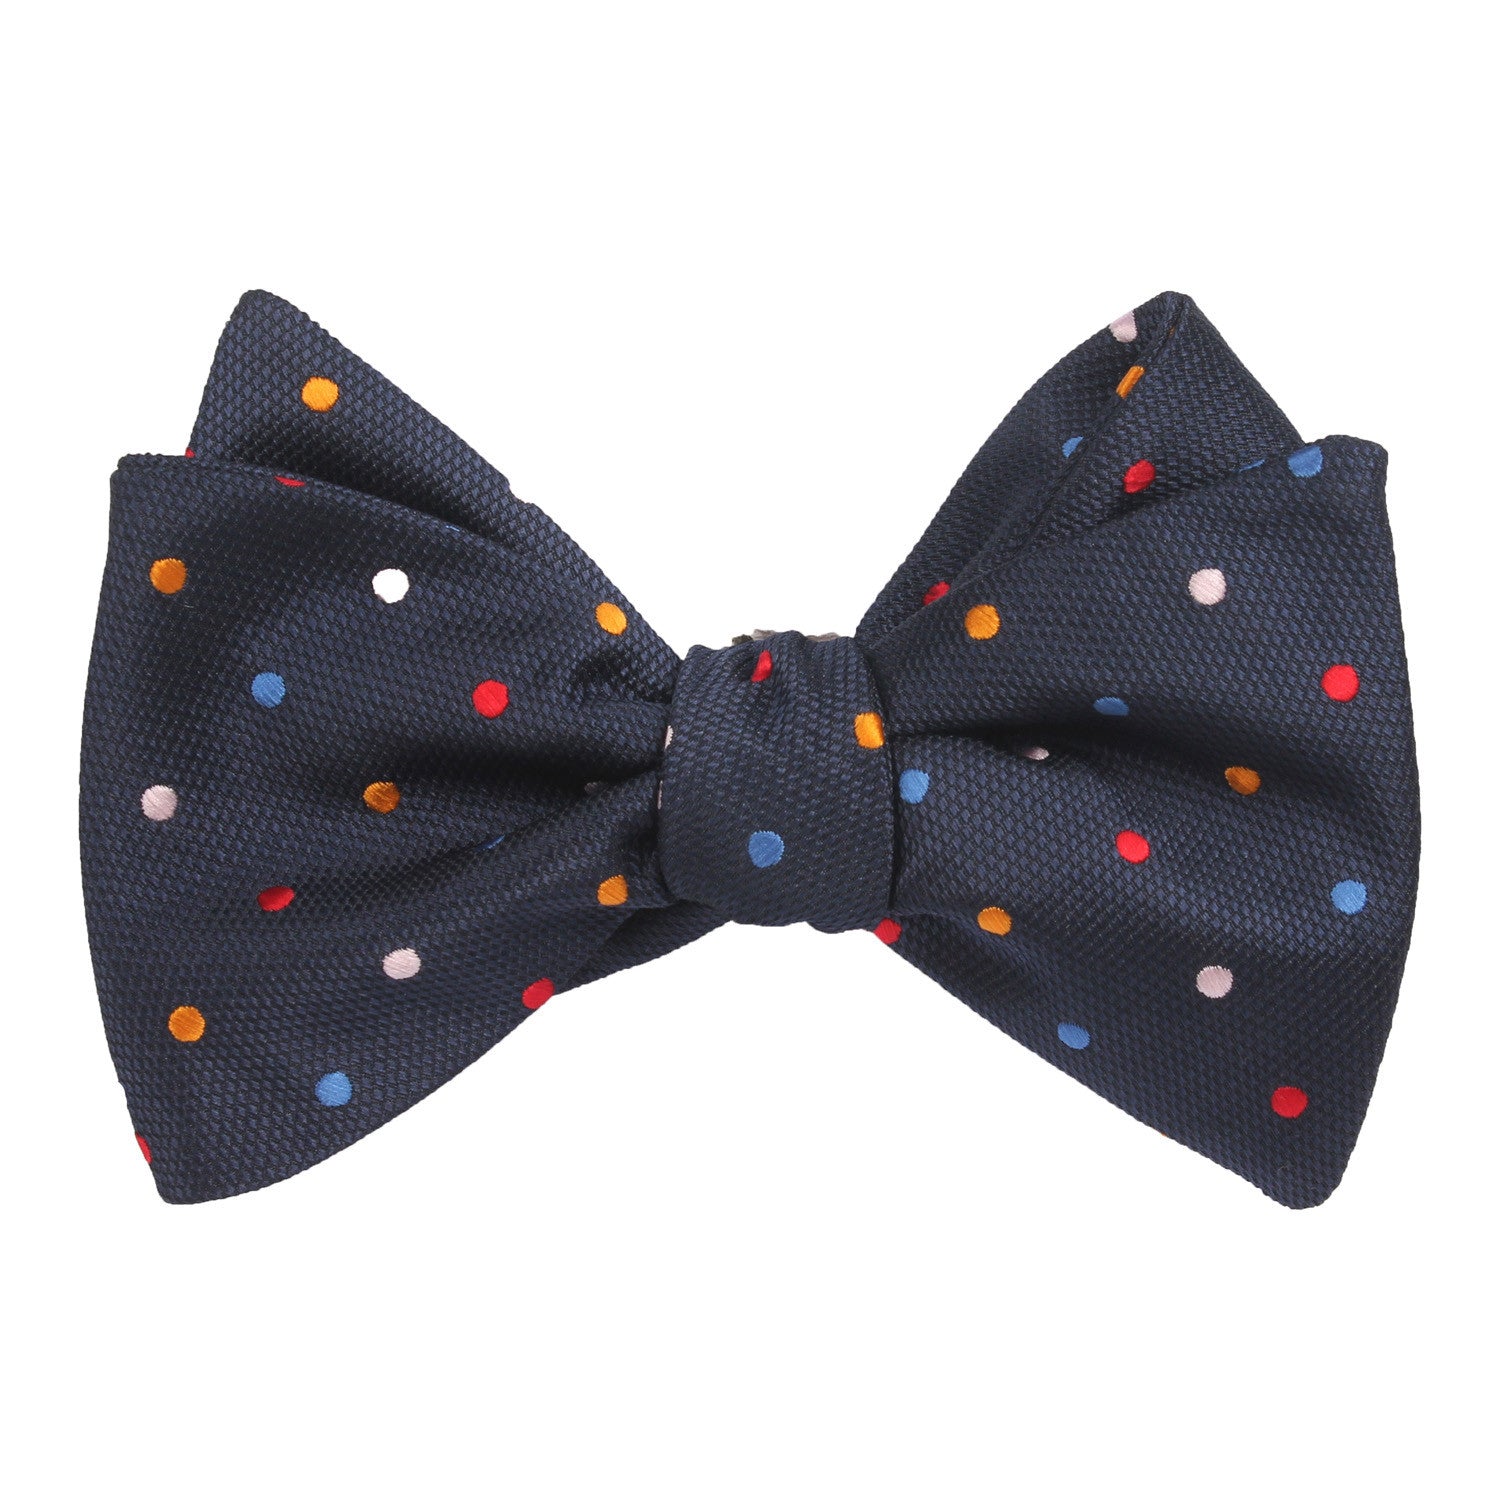 Navy Blue with Confetti Polka Dots Self Tie Bow Tie Self tied knot by OTAA